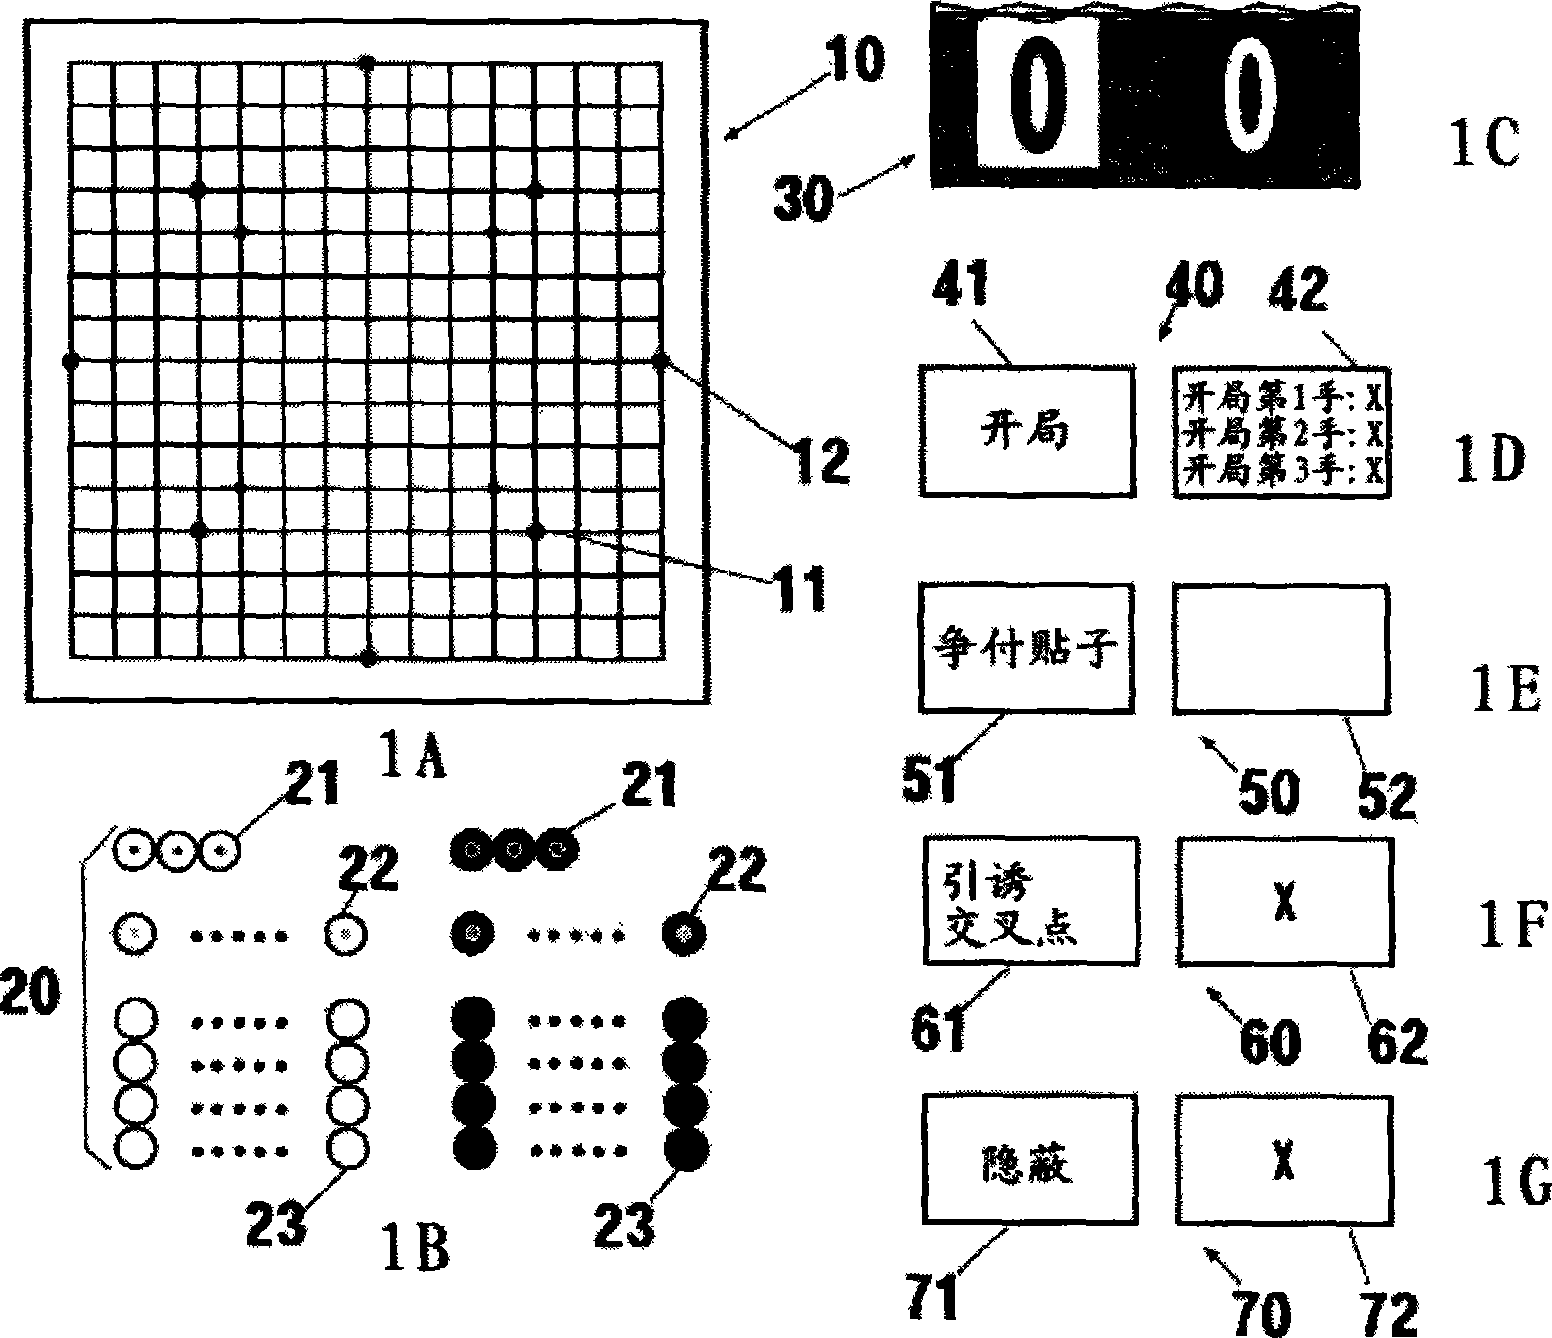 Tools and method for battle board game utilizing Weichi rules